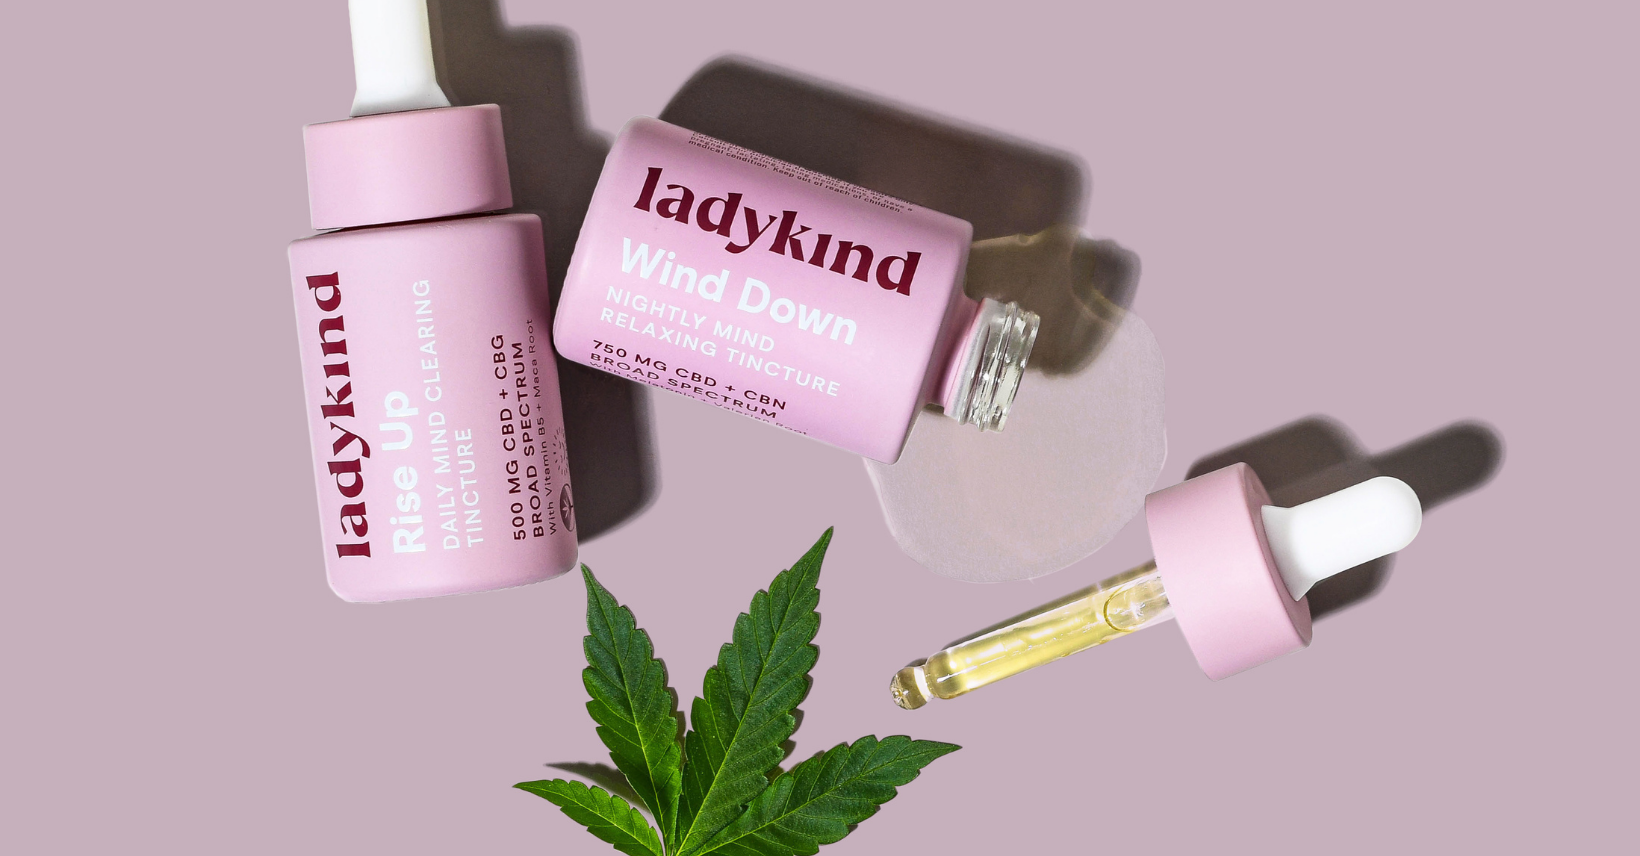 Ladykind cbd oil for women with maca root and valerian root